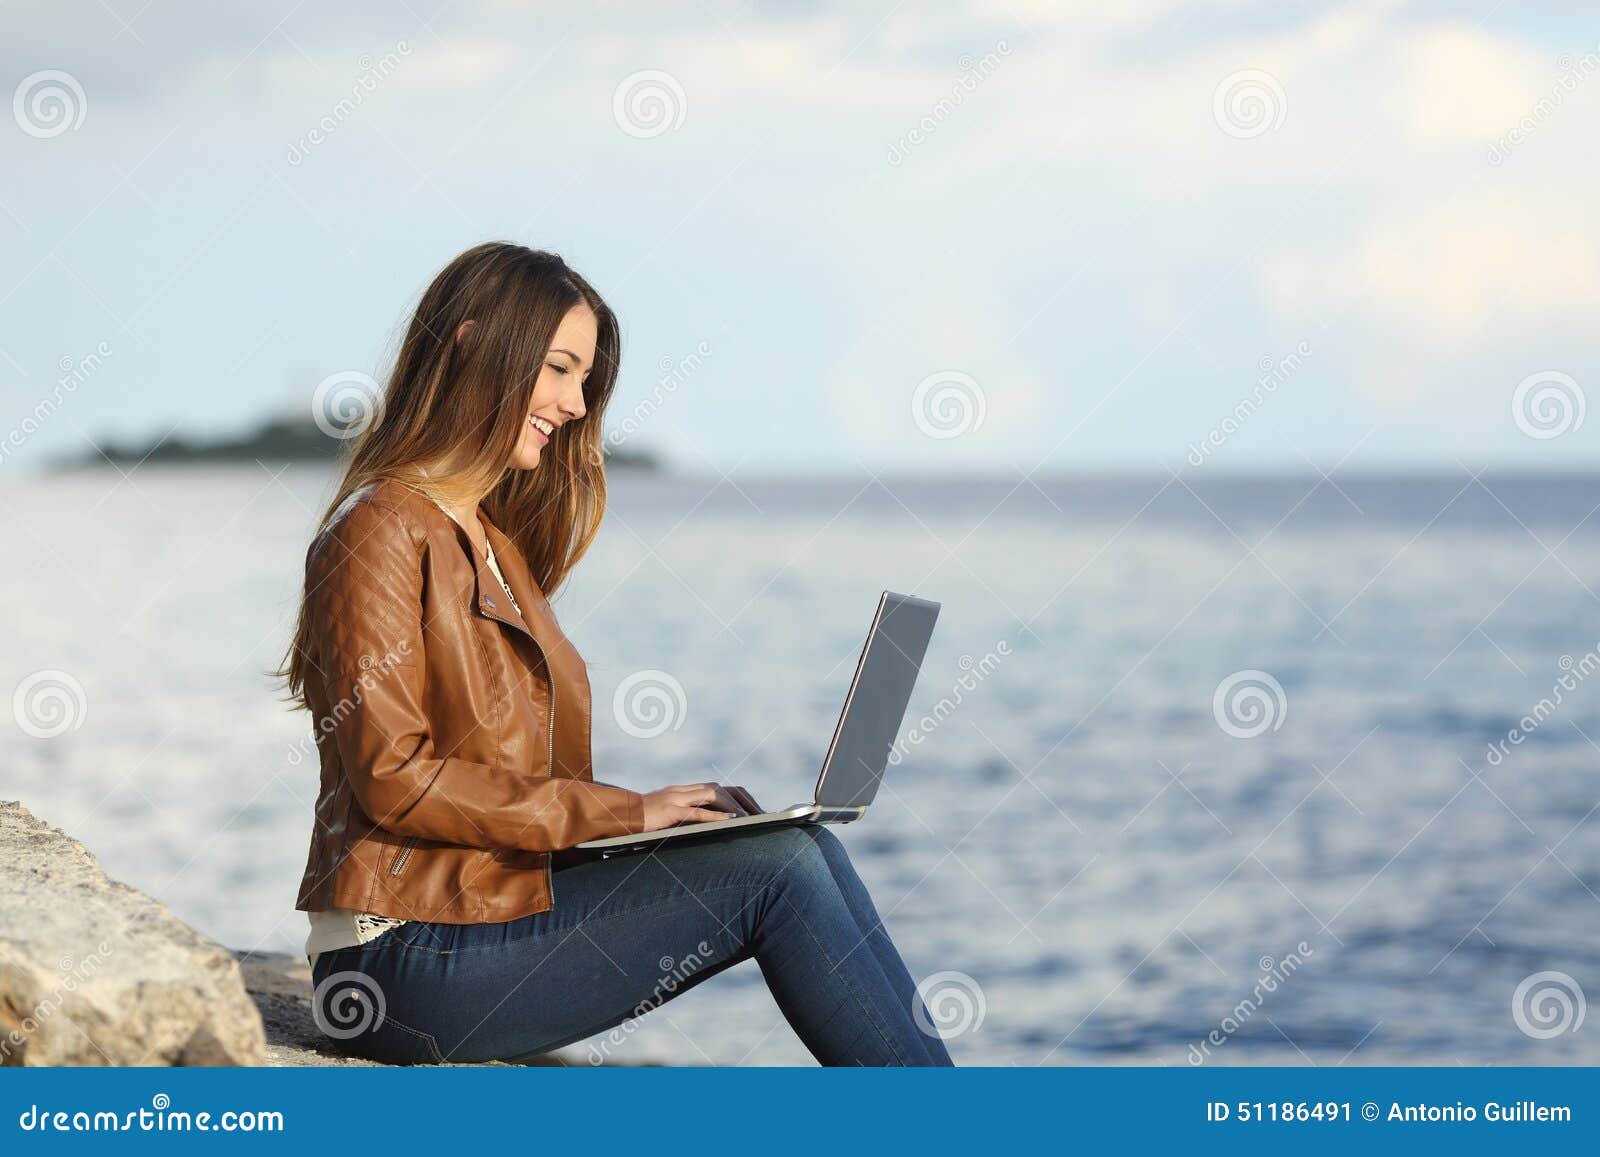 self employed woman working with a laptop on the beach